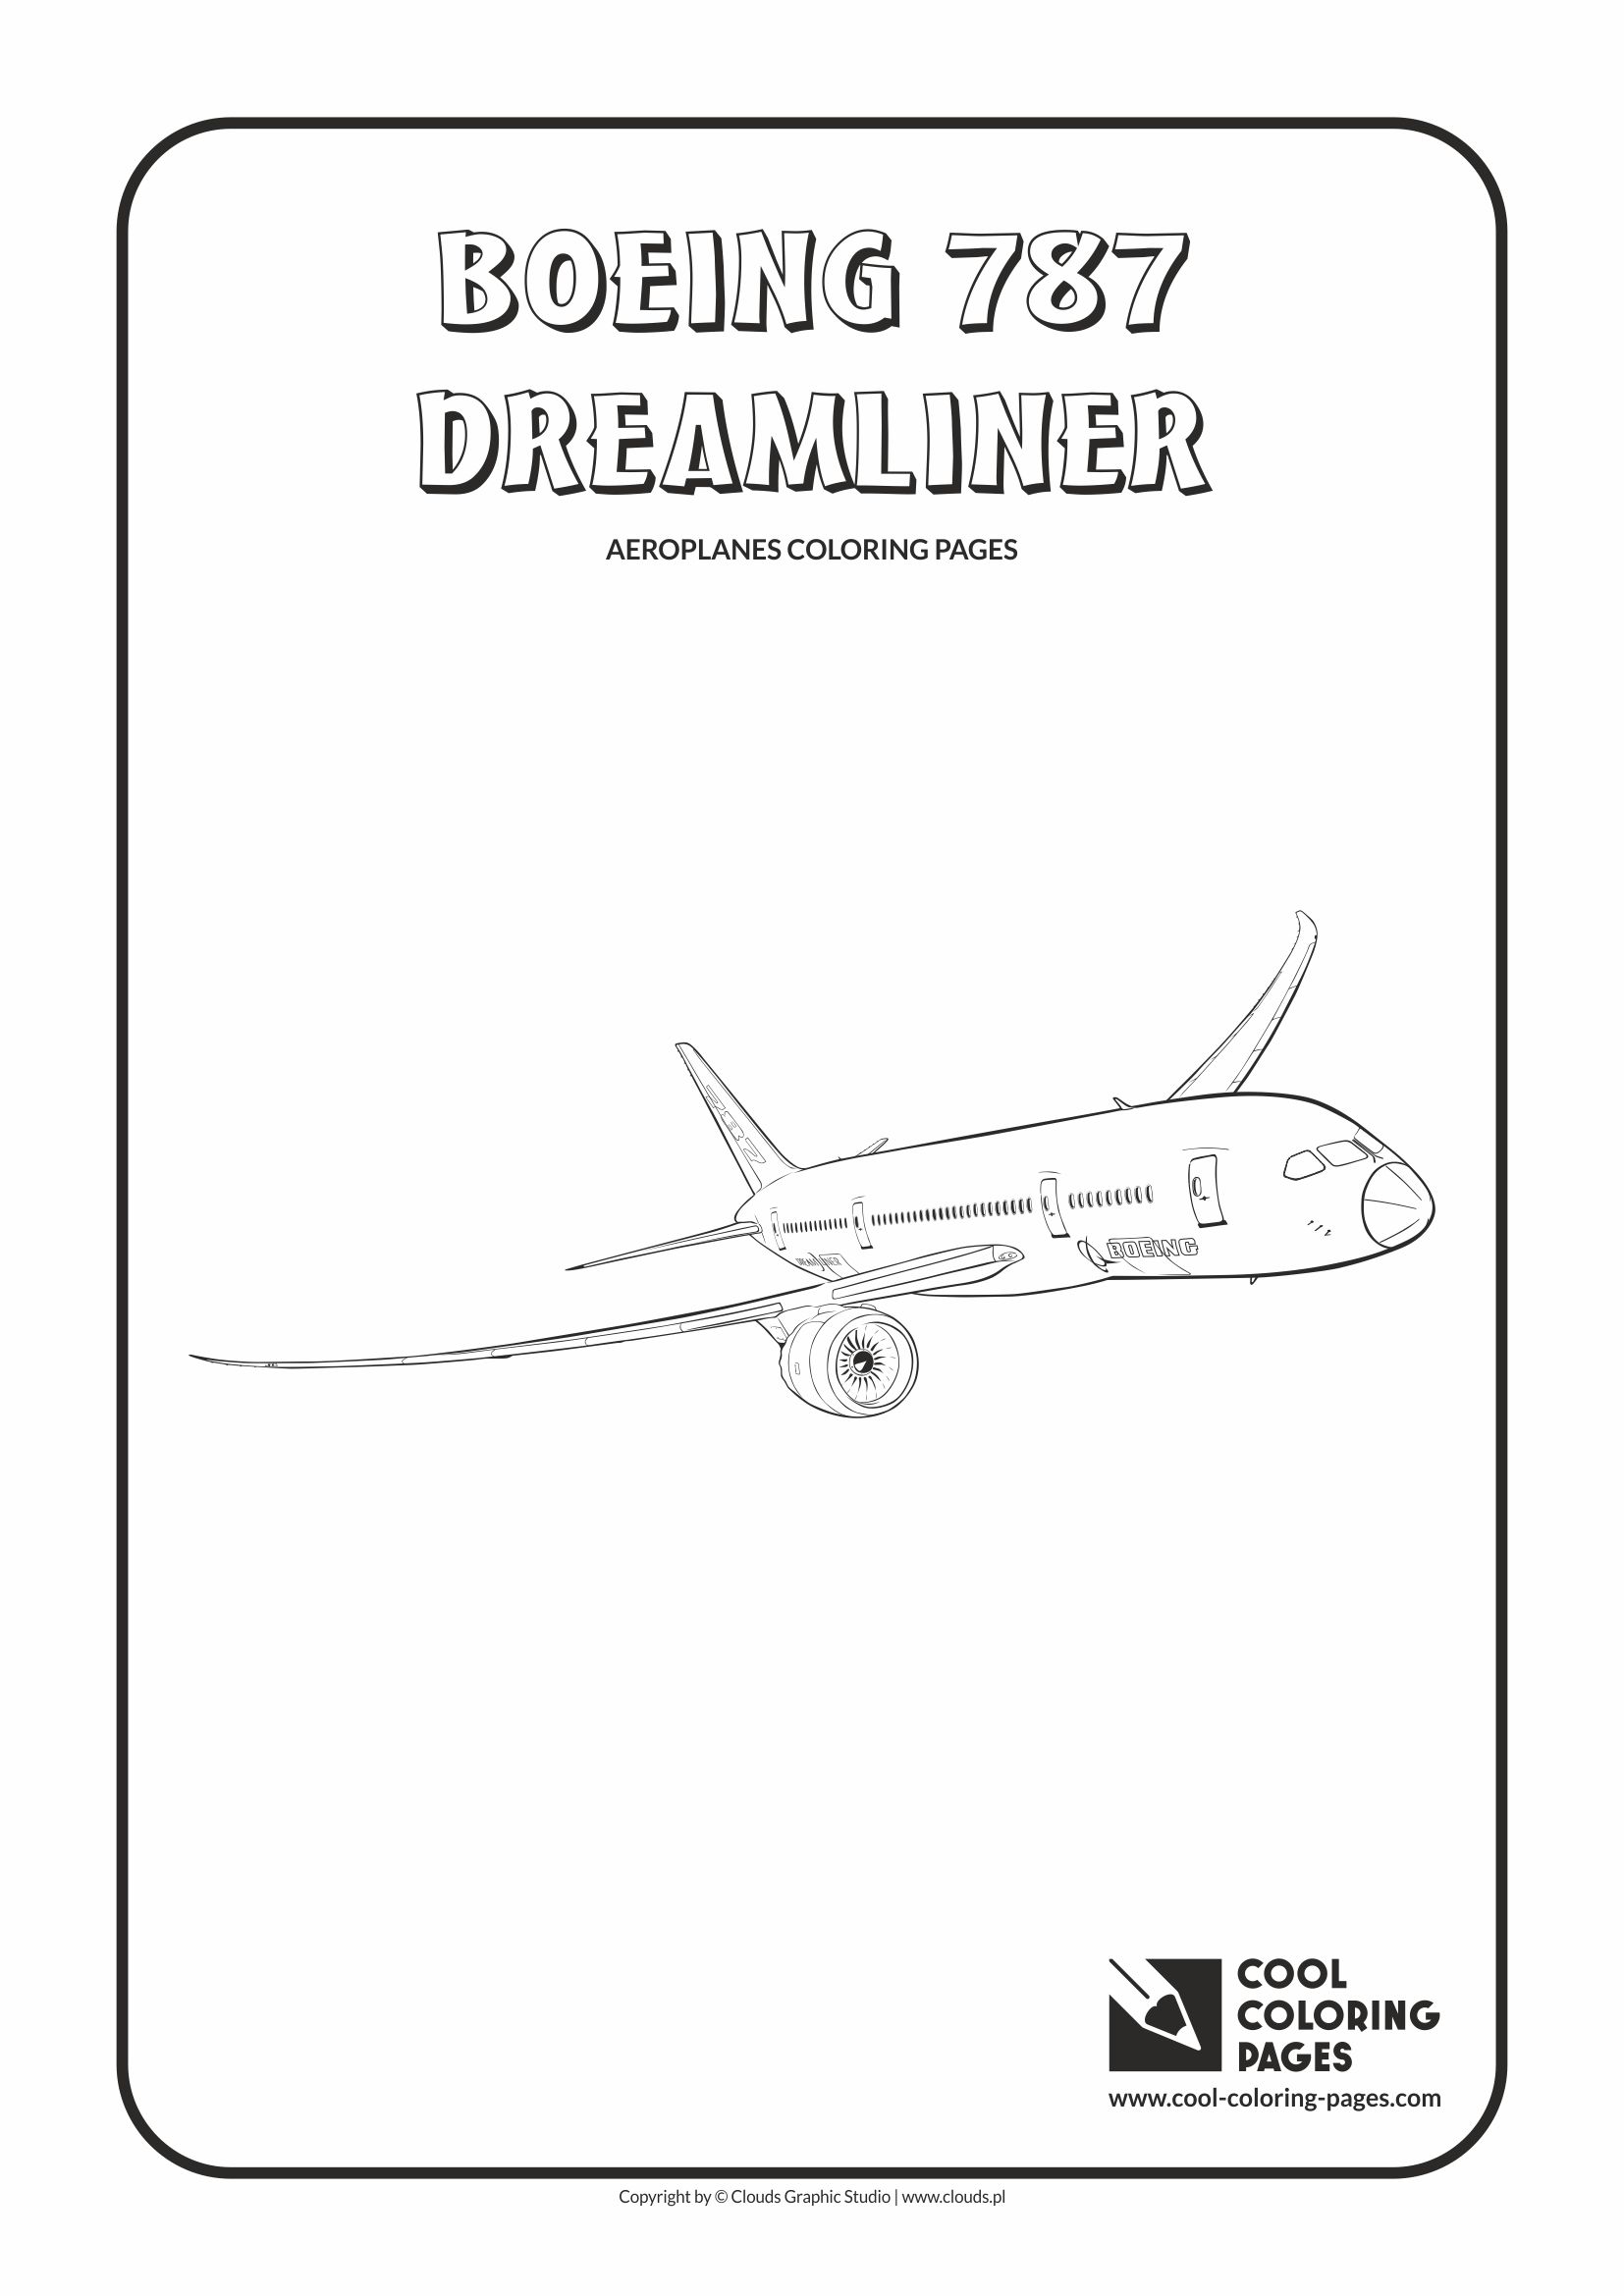 Cool Coloring Pages - Vehicles / Boeing 787 Dreamliner / Coloring page with Boeing 787 Dreamliner